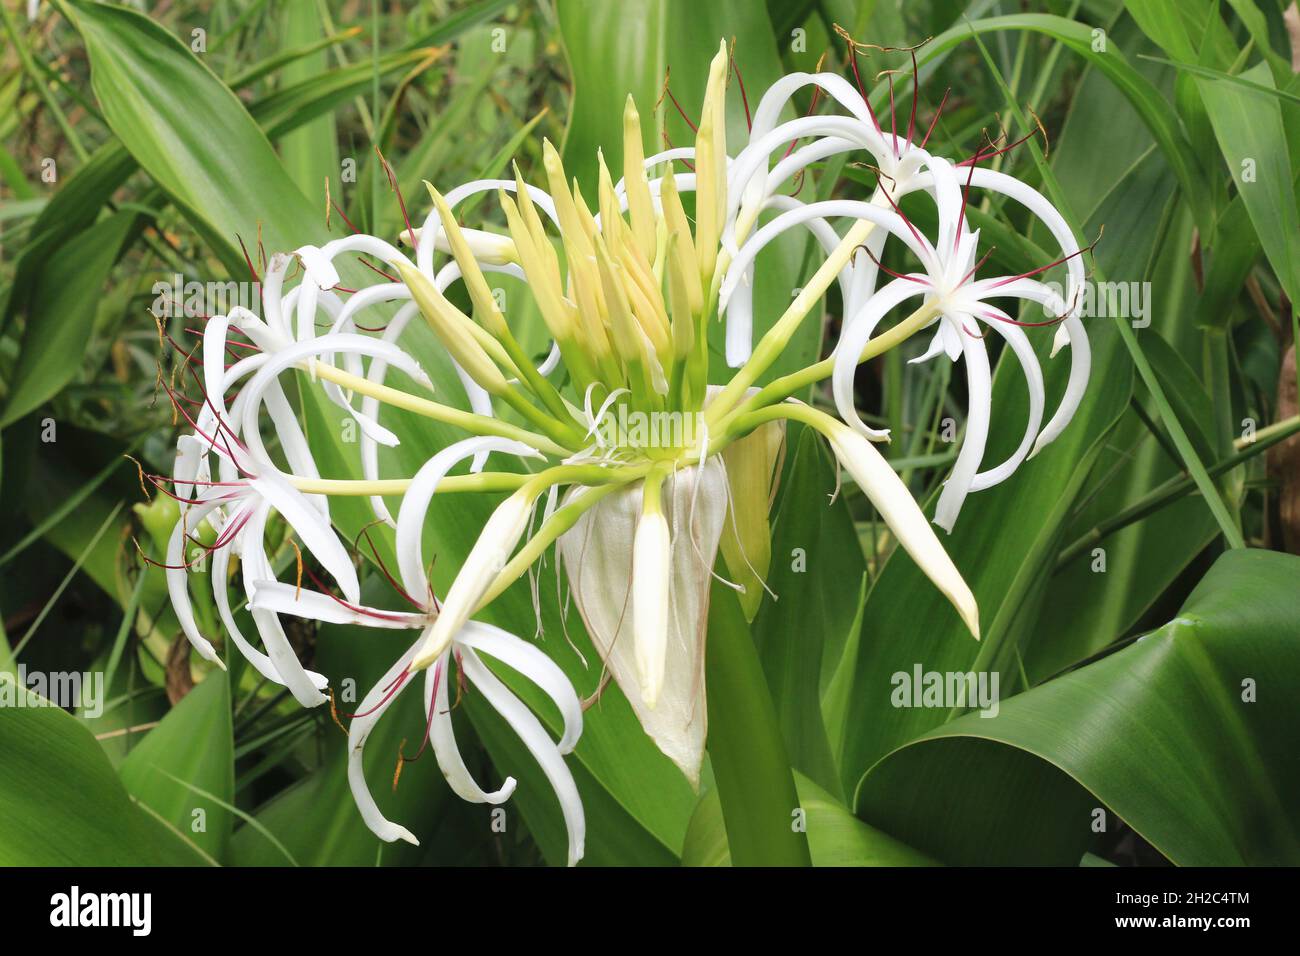 beautiful view of blooming Poison Bulb,Crinum asiaticum flowers,close-up of white flowers blooming in the garden Stock Photo